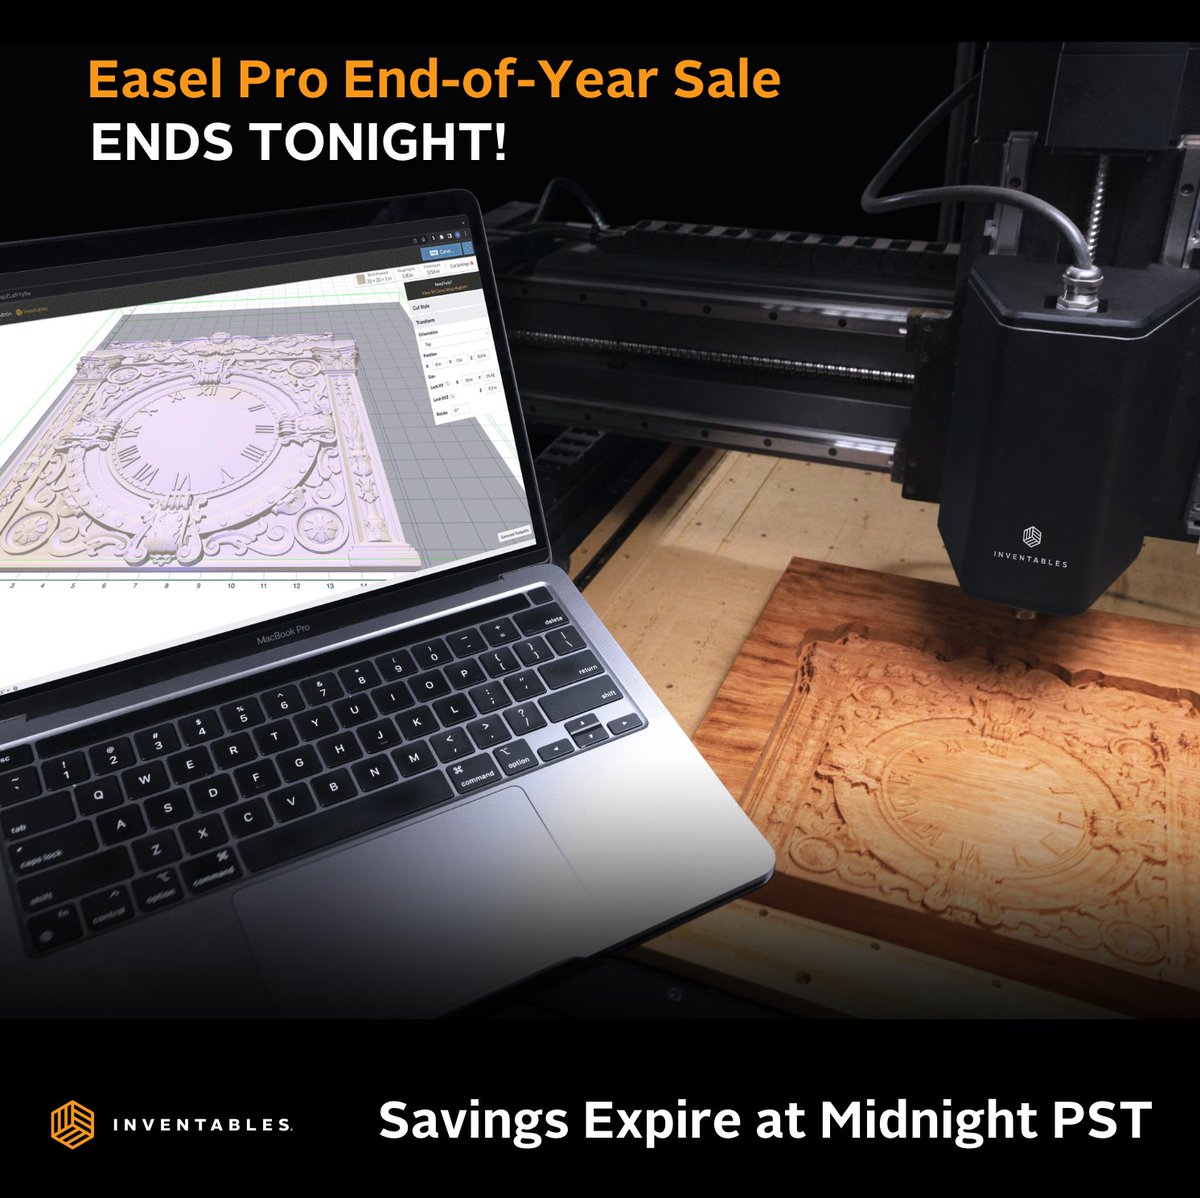 Last day to save big on our End of the Year Easel Pro sale! Save up to 35% off! inventables.com/products/easel…